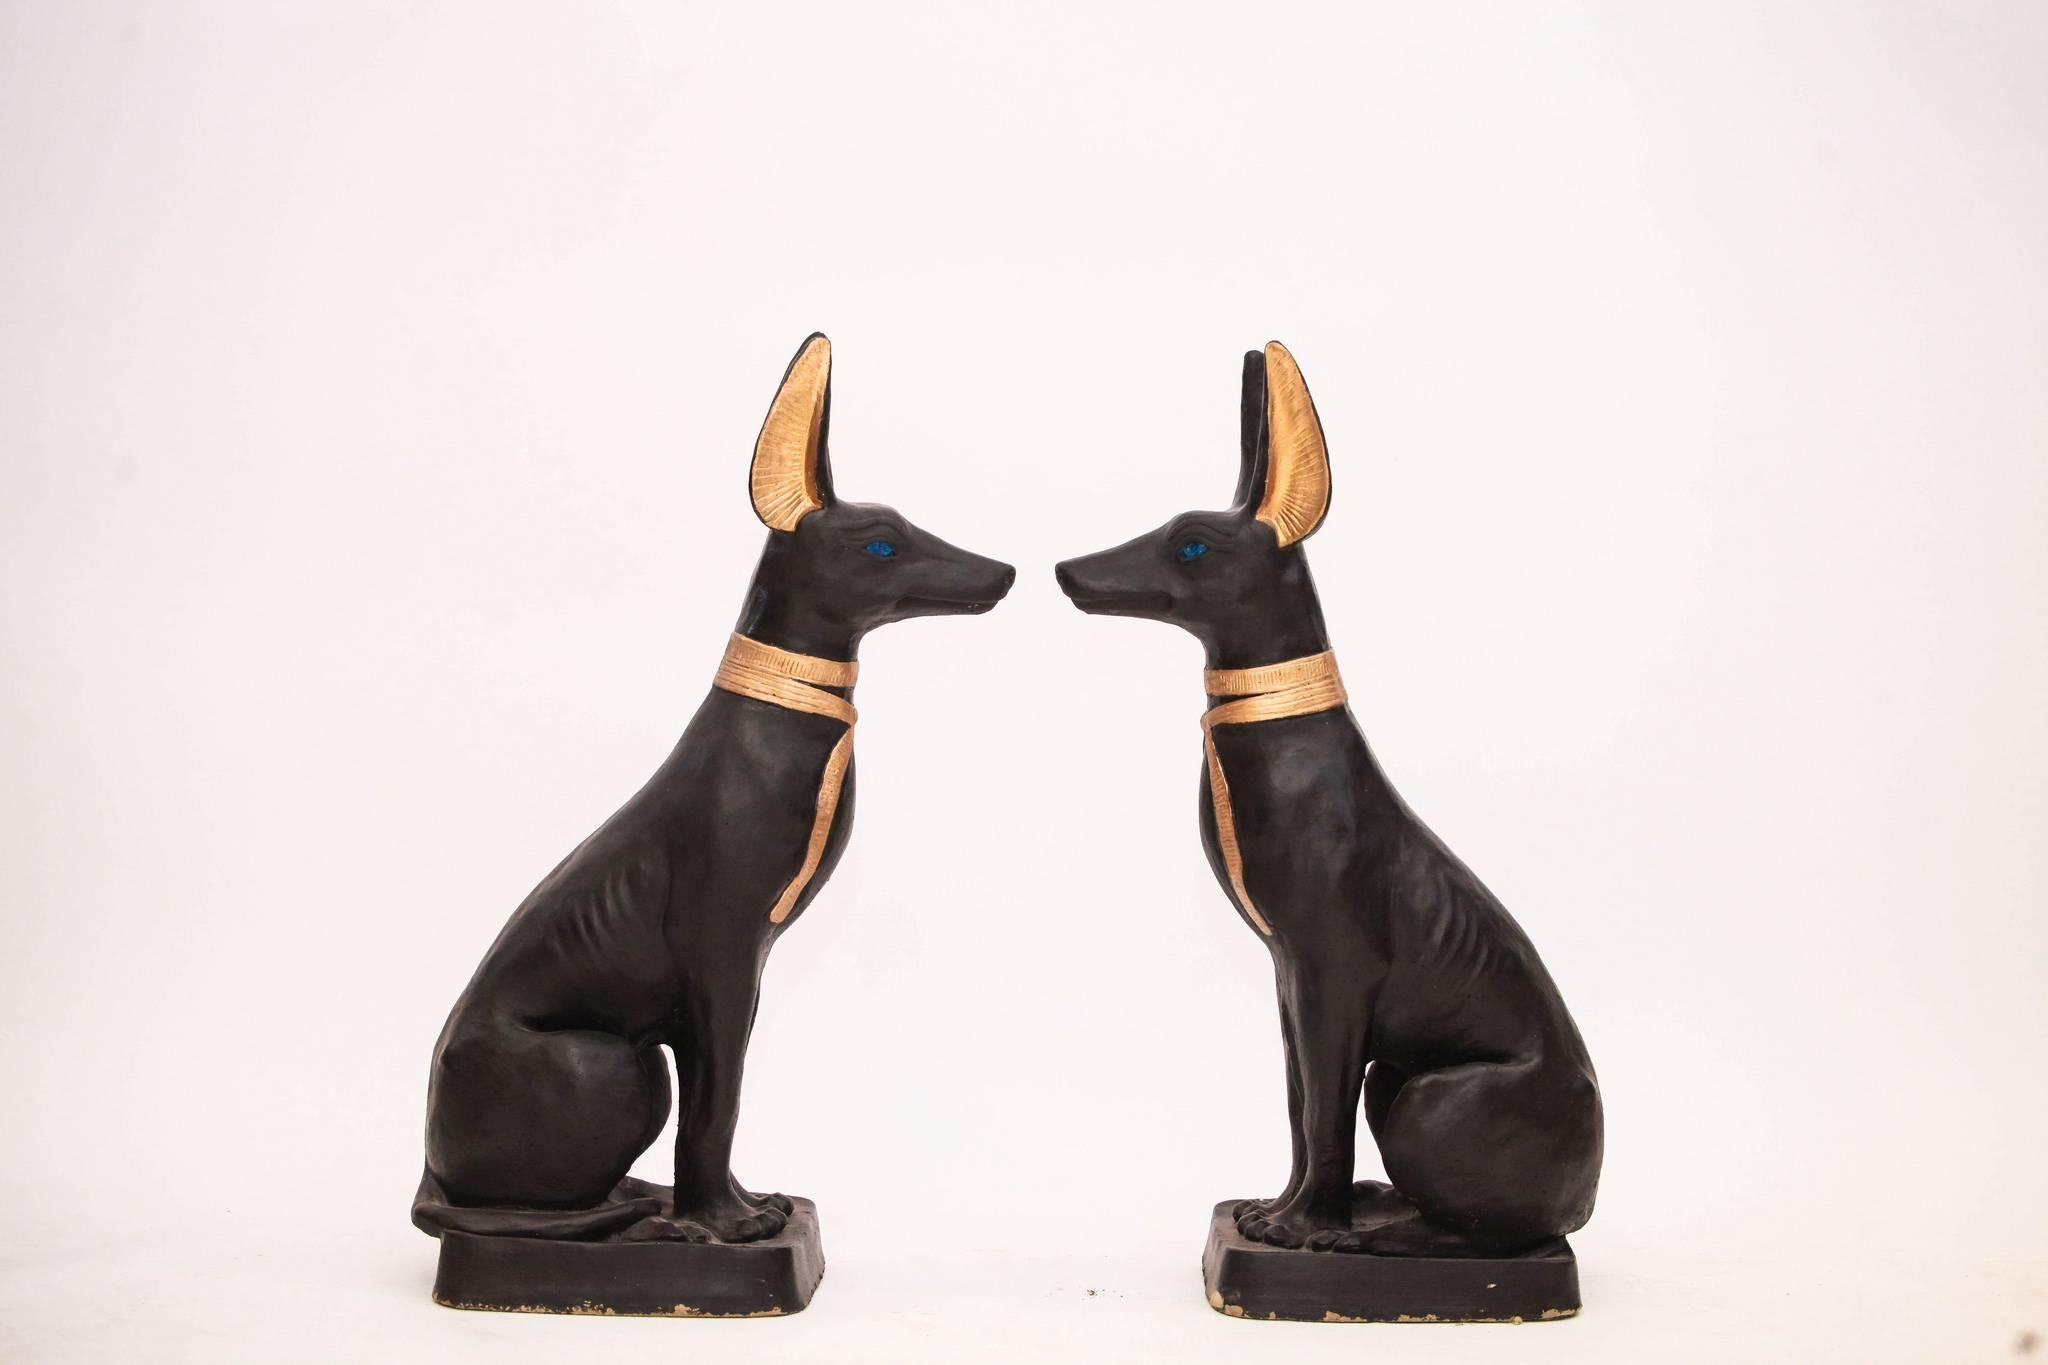 Vintage pair of large painted Egyptian Anubis guardian dogs. These black beauties have golden ears and ties with blue eyes.